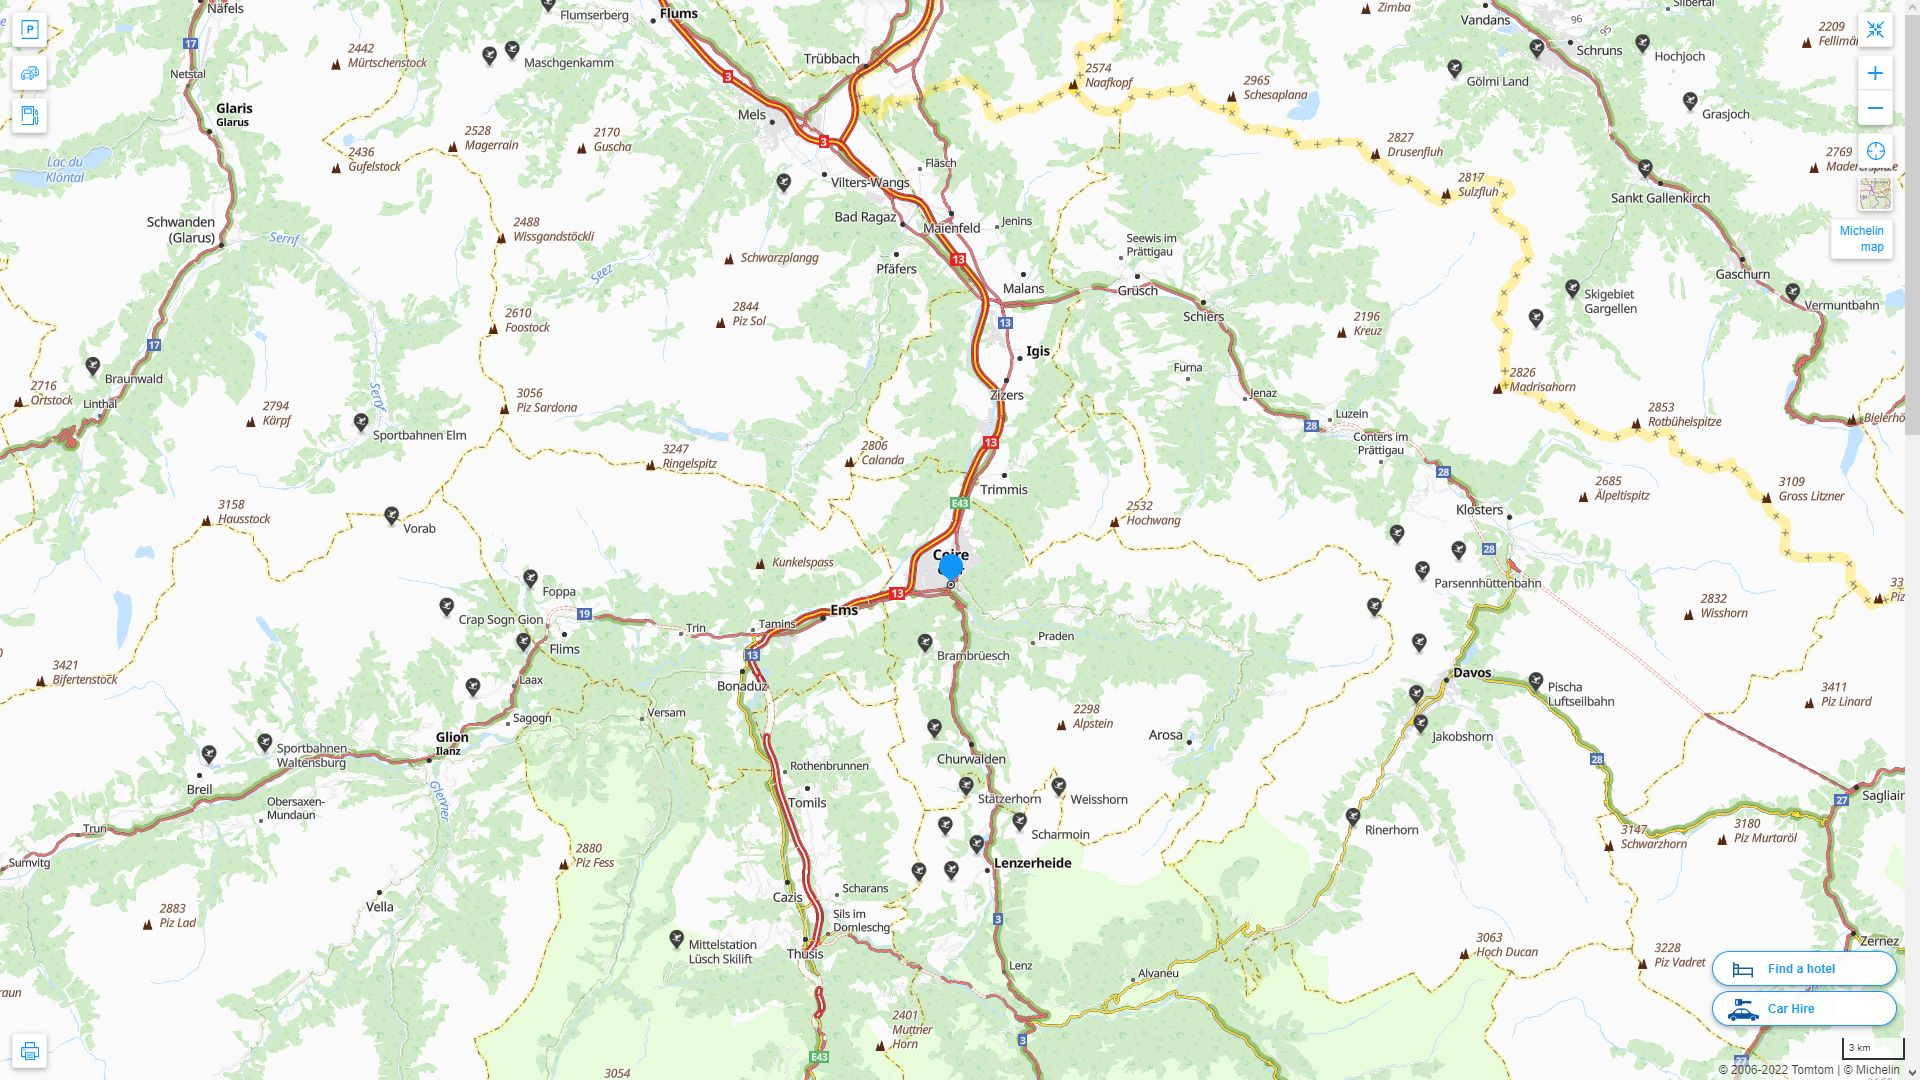 Chur Highway and Road Map